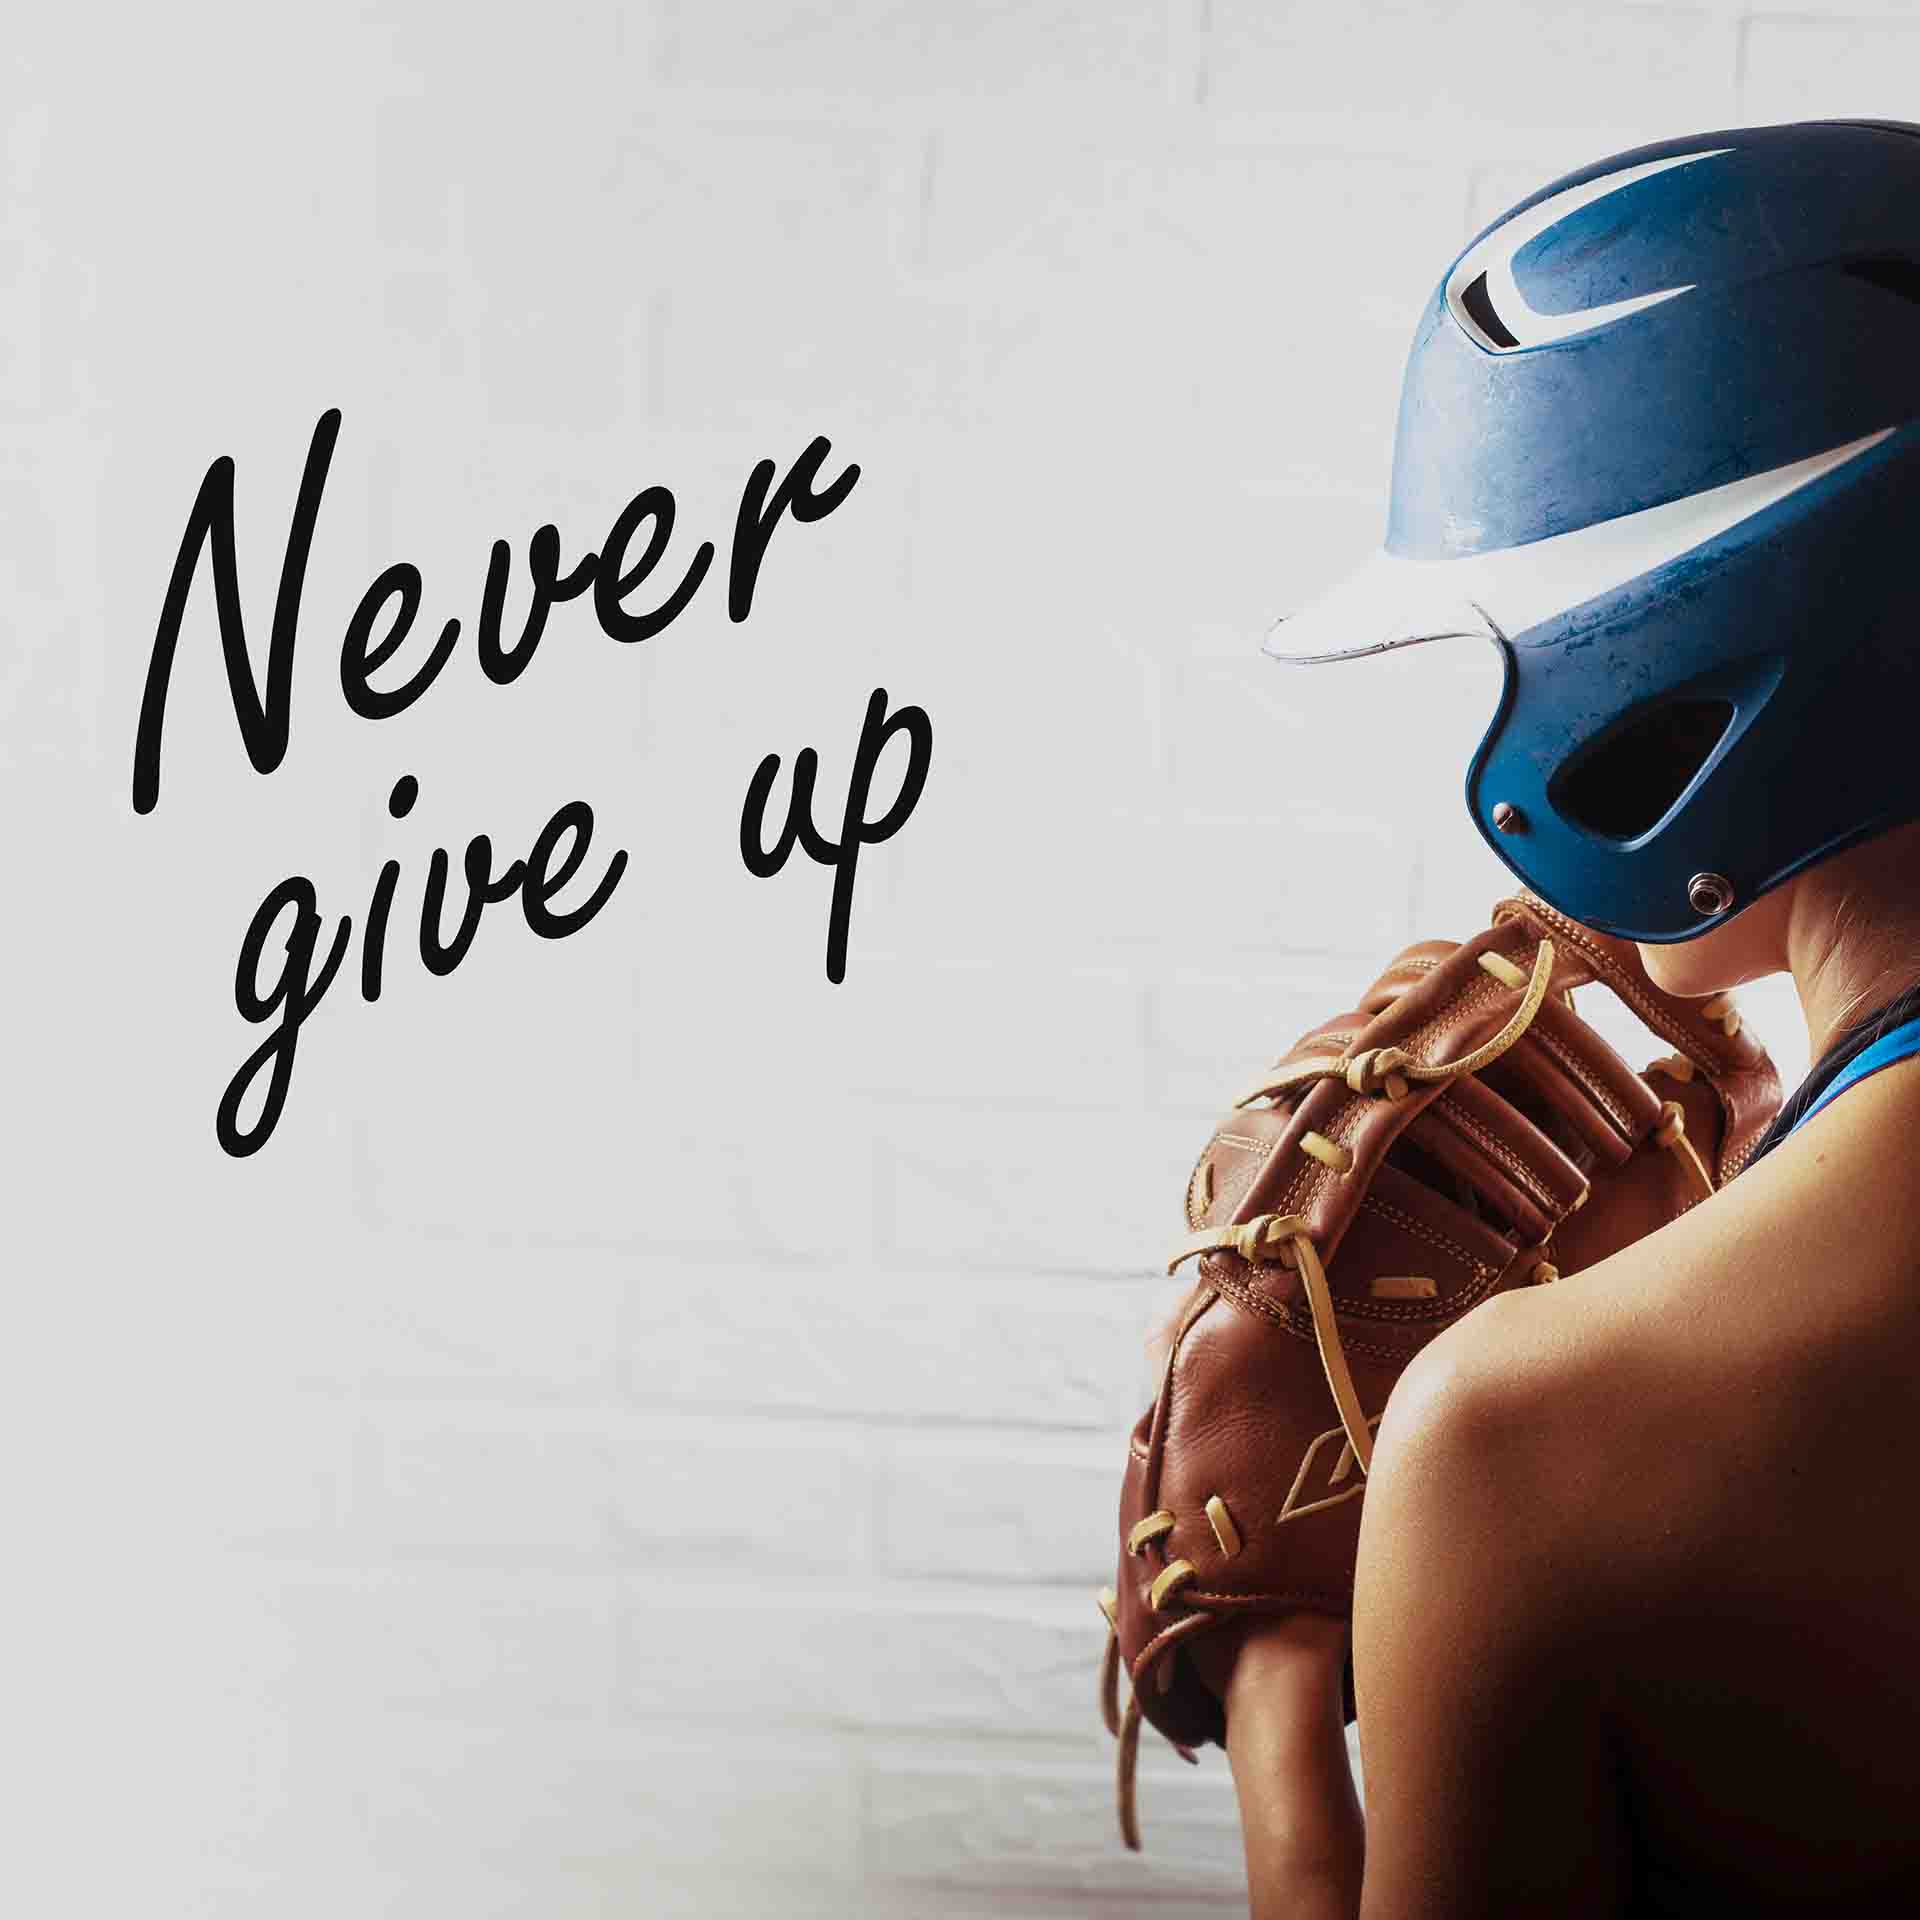 Best Never Give Up Quotes and Sayings in 2022